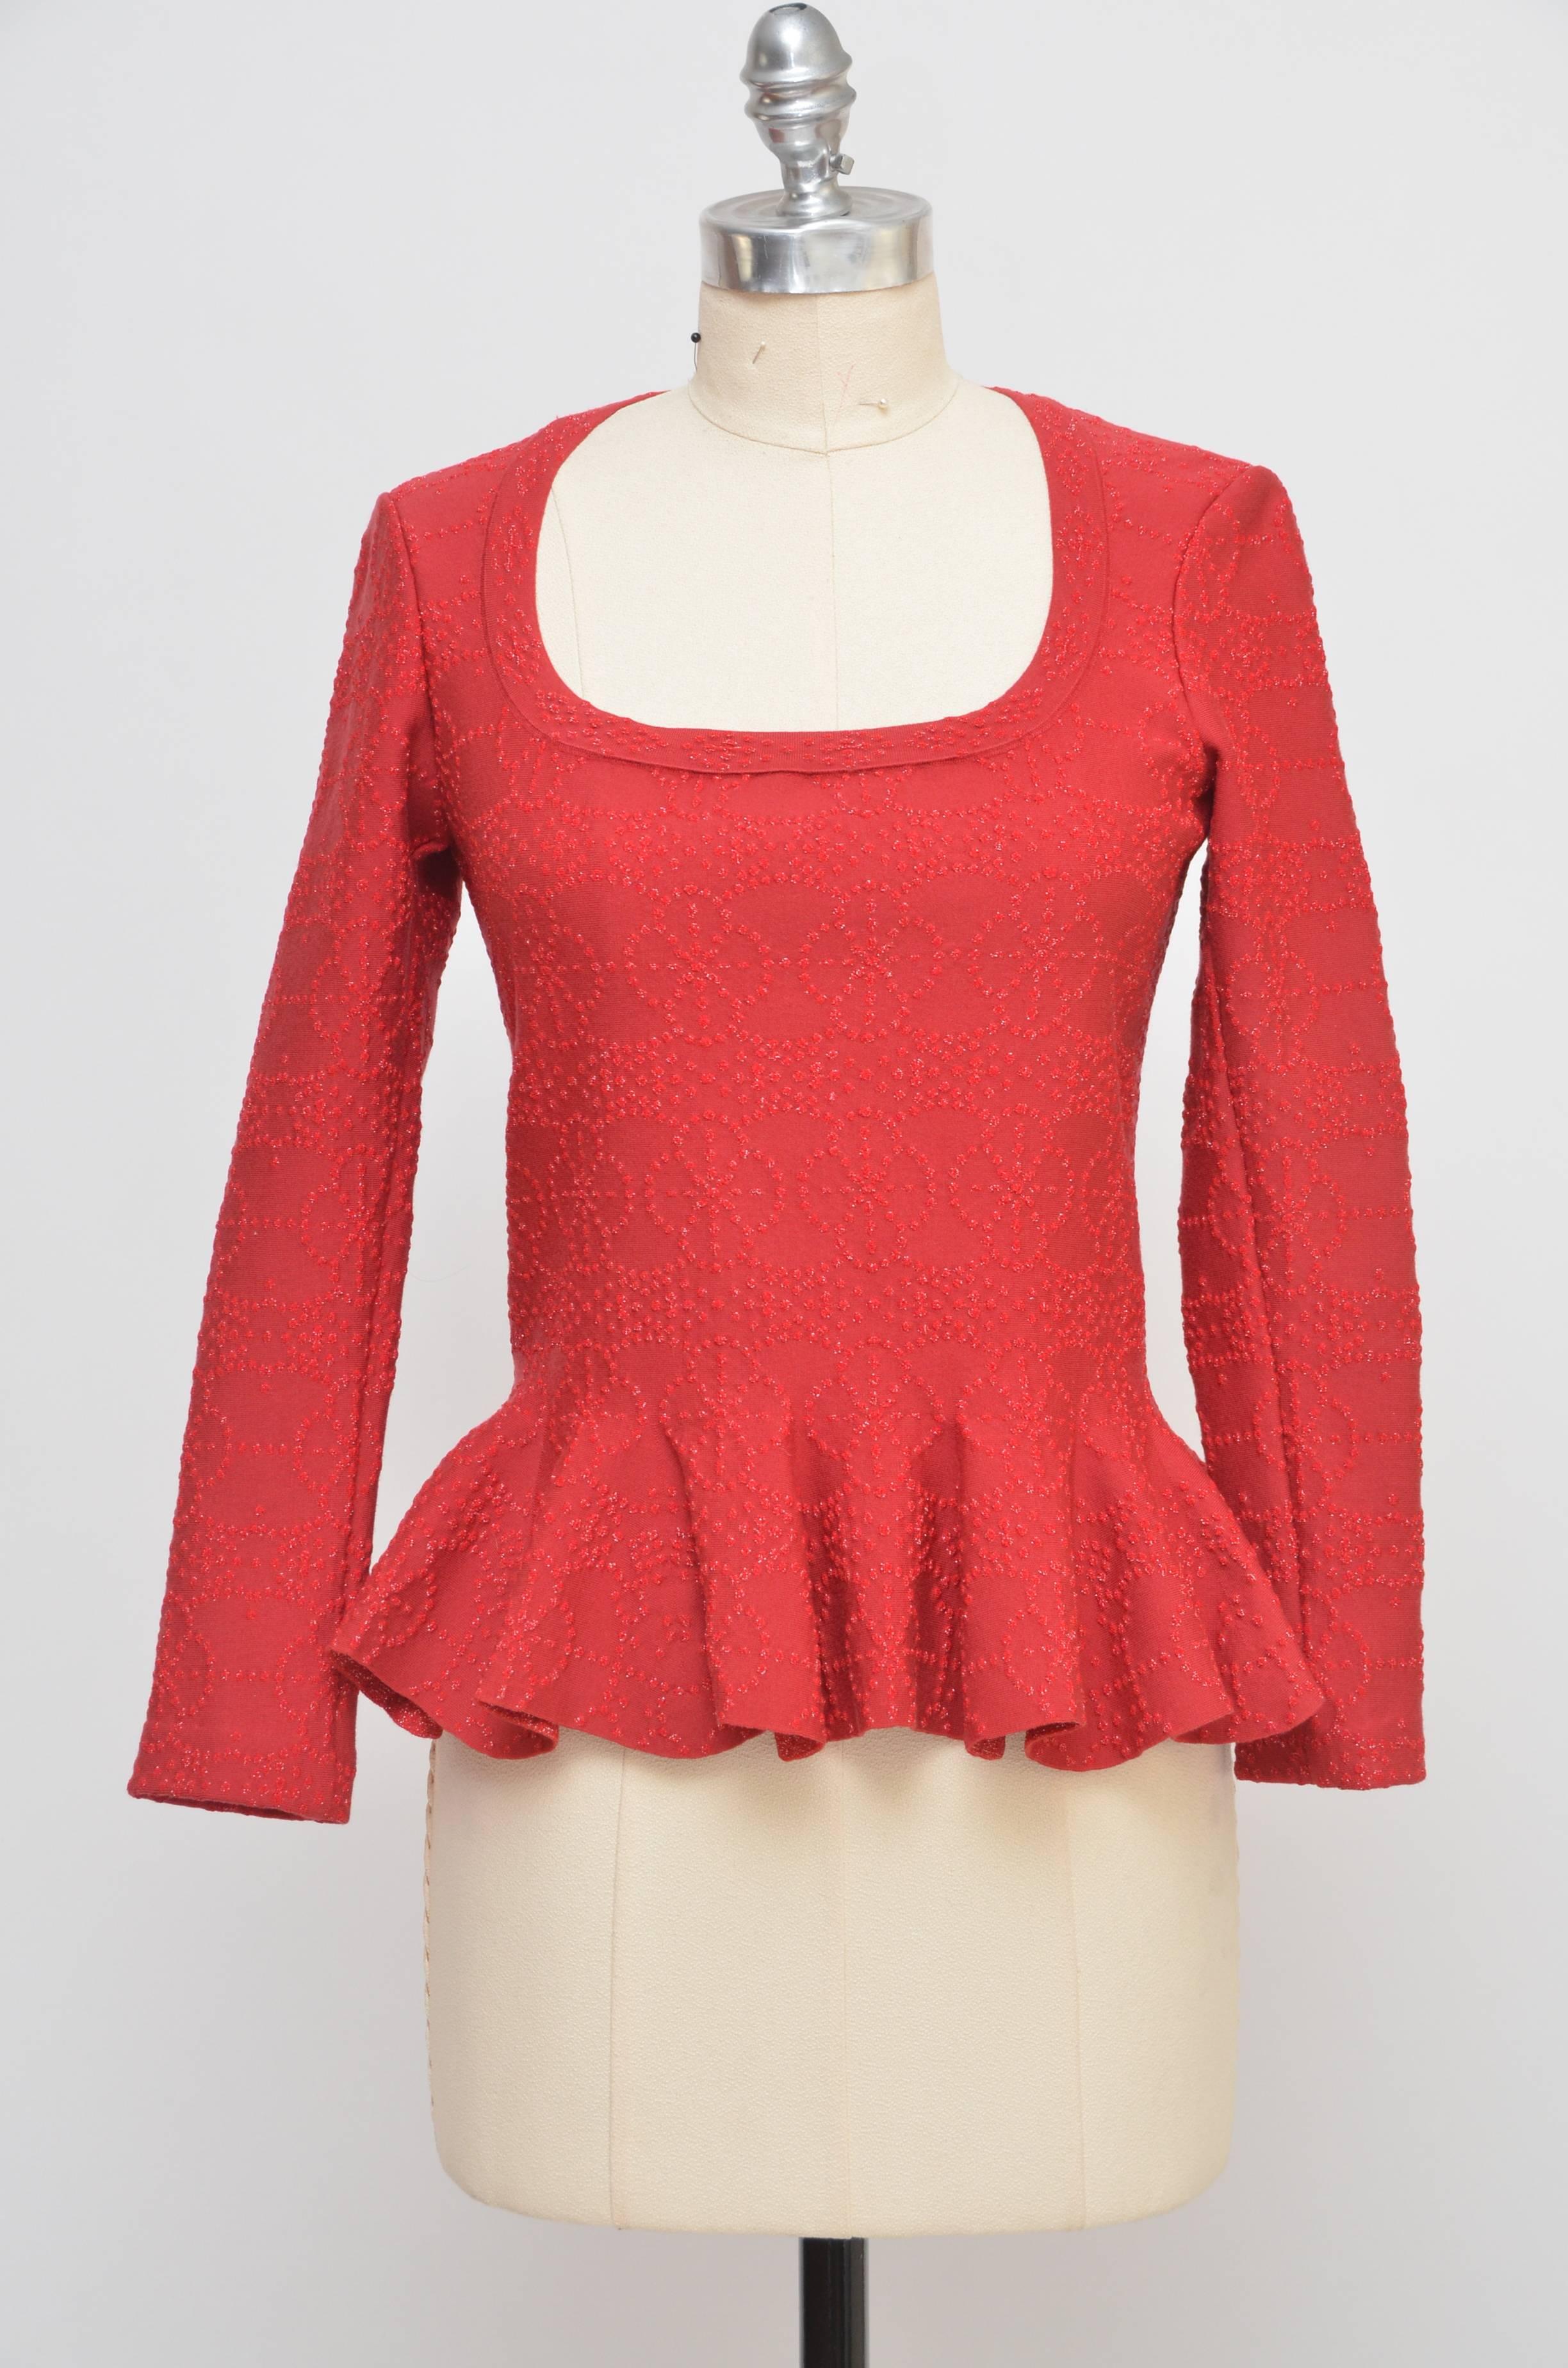 Alaia top .
Mail color: ruby red.Tag Size: 42.
Arabesque Motif featuring metallic embroidered sparkle textured pattern
Top features scoop neck, concealed zip at back, flounced  waist. 
W 31